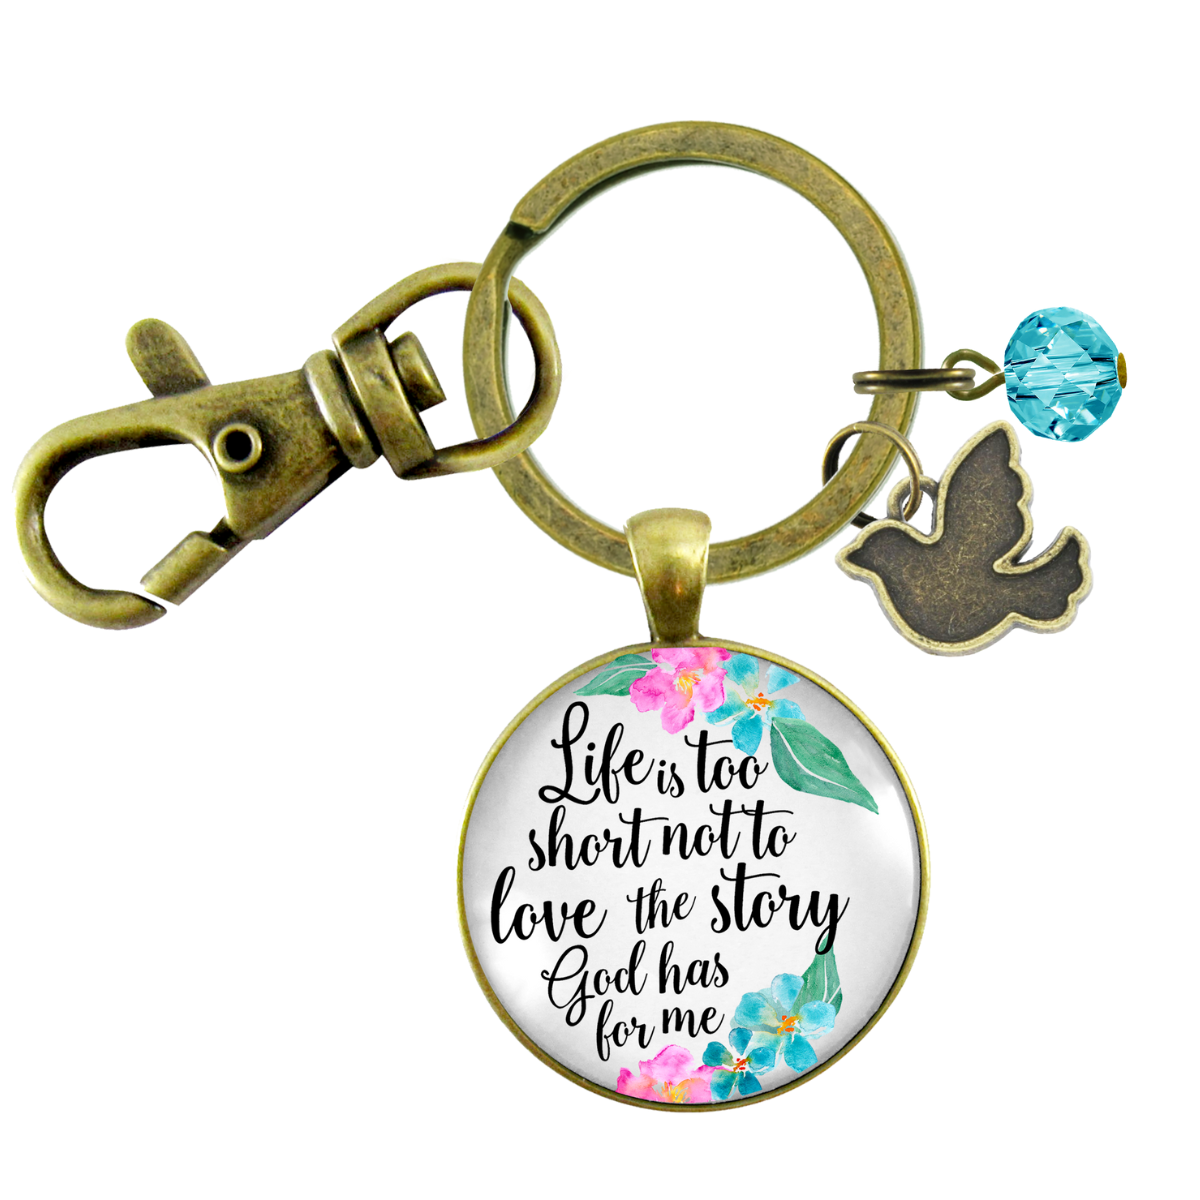 Faith Keychain Life is Too Short Not To Love The Story God Has For Me - Gutsy Goodness